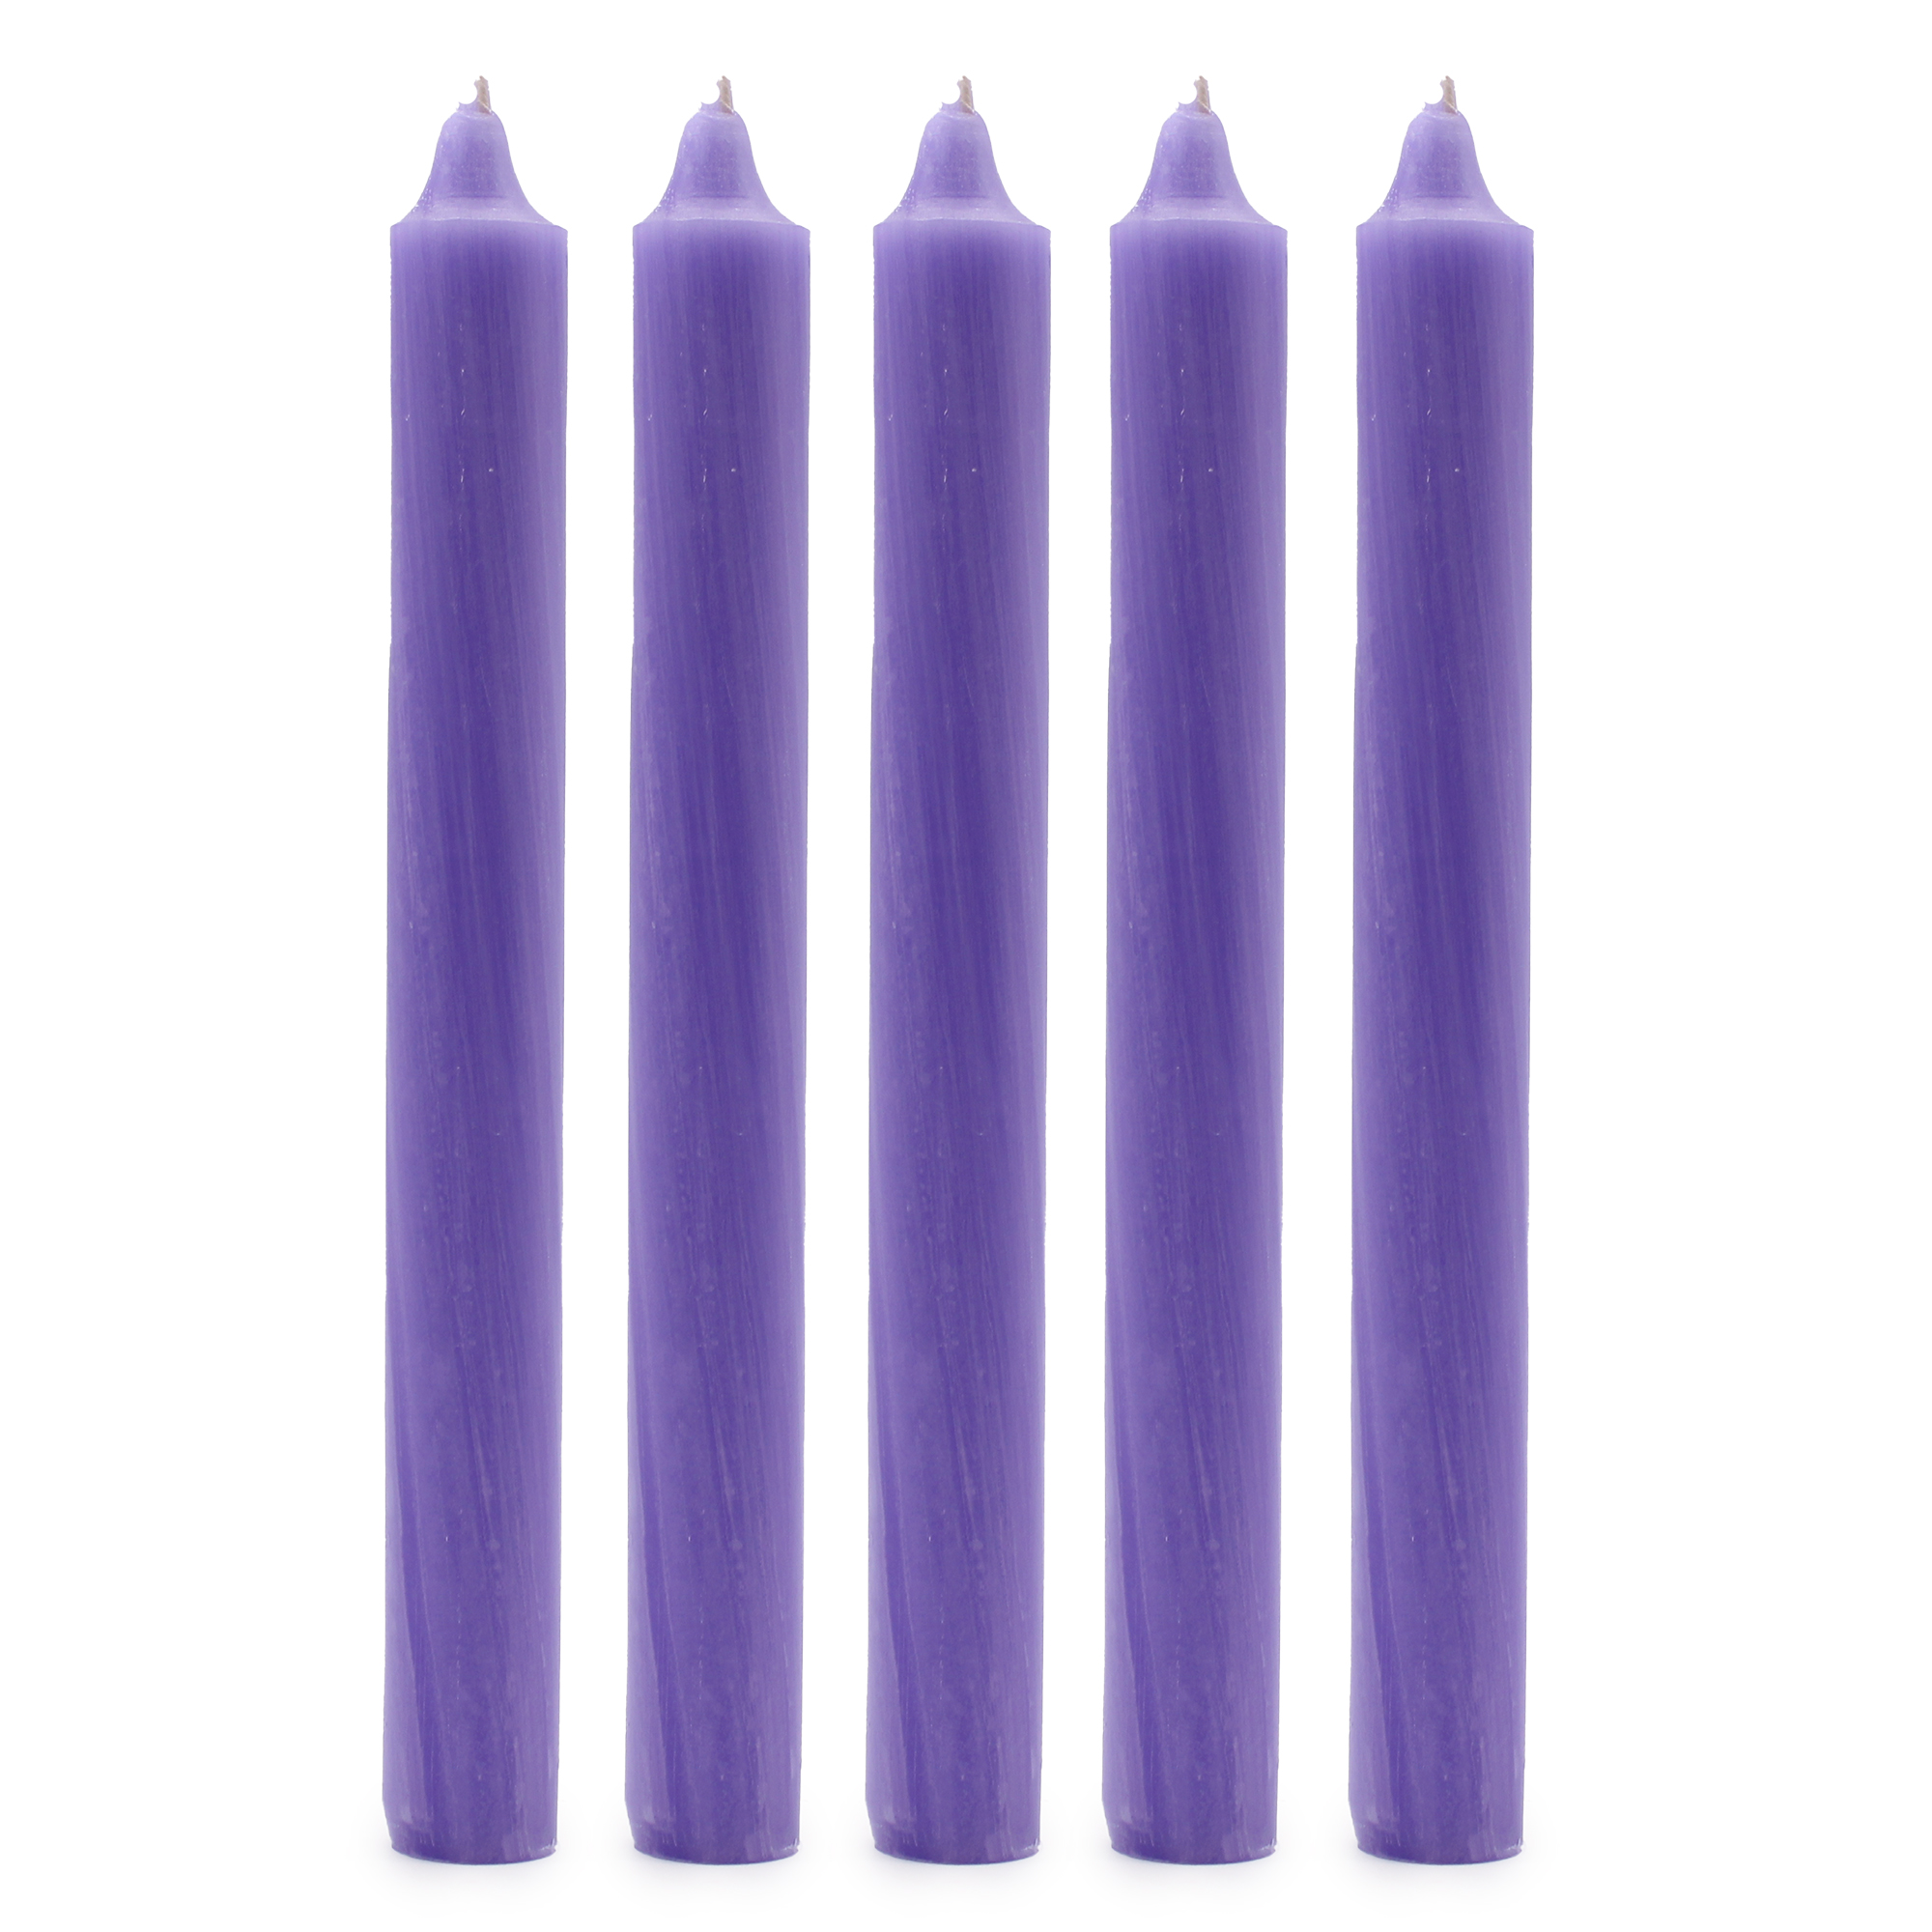 Solid Colour Dinner Candles - Rustic Lilac - Pack of 5